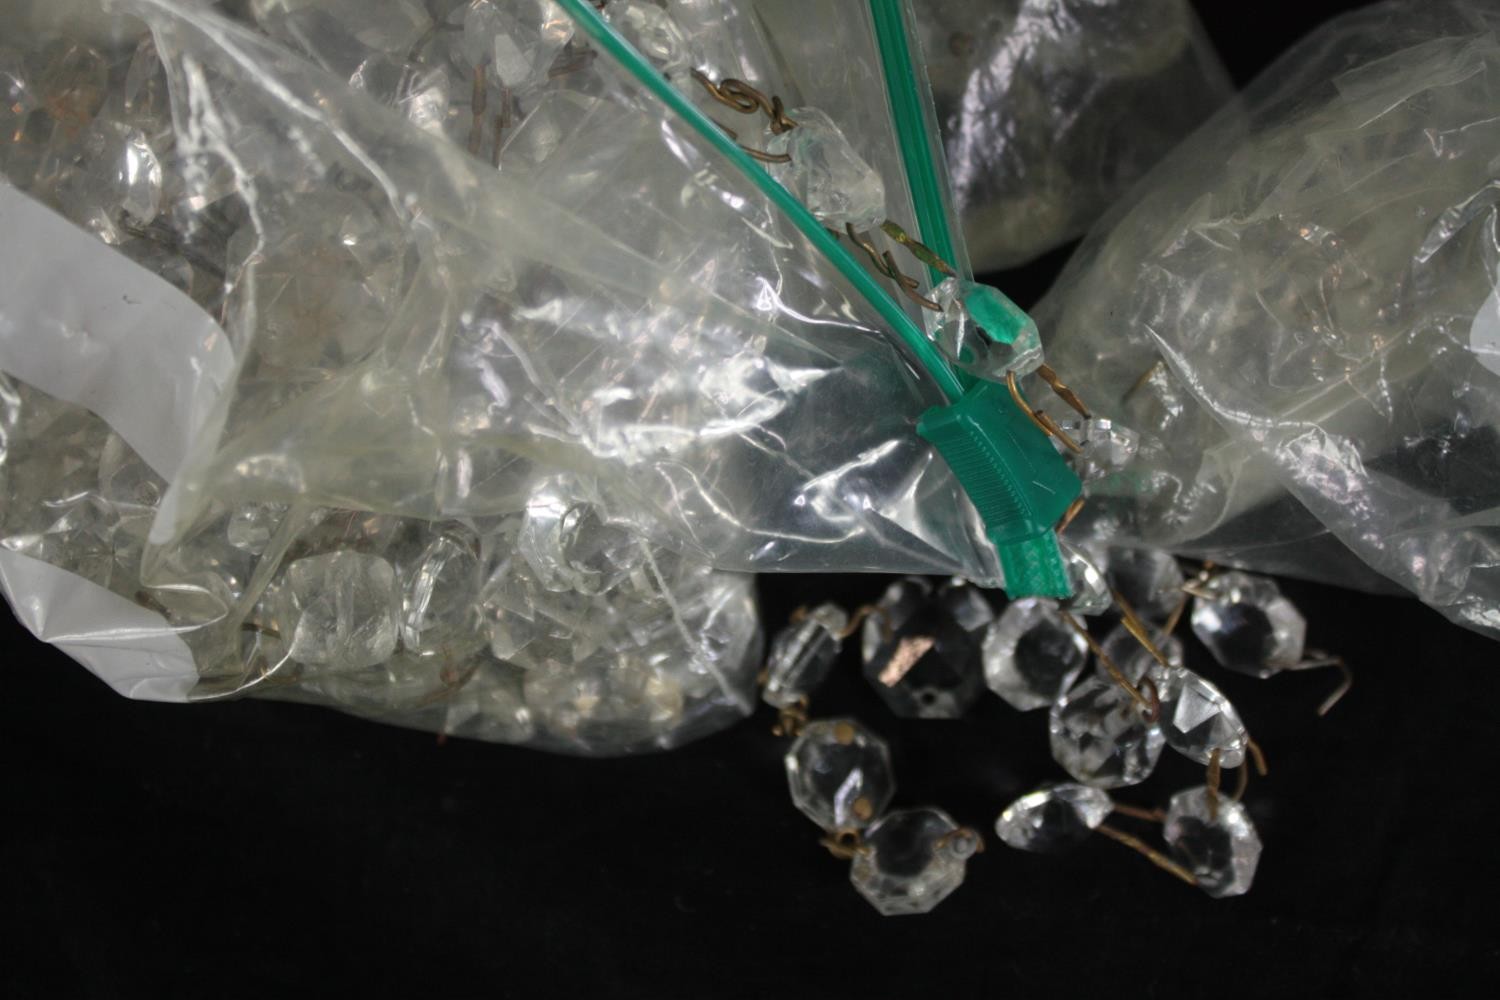 A box of glass chandelier parts. - Image 9 of 10